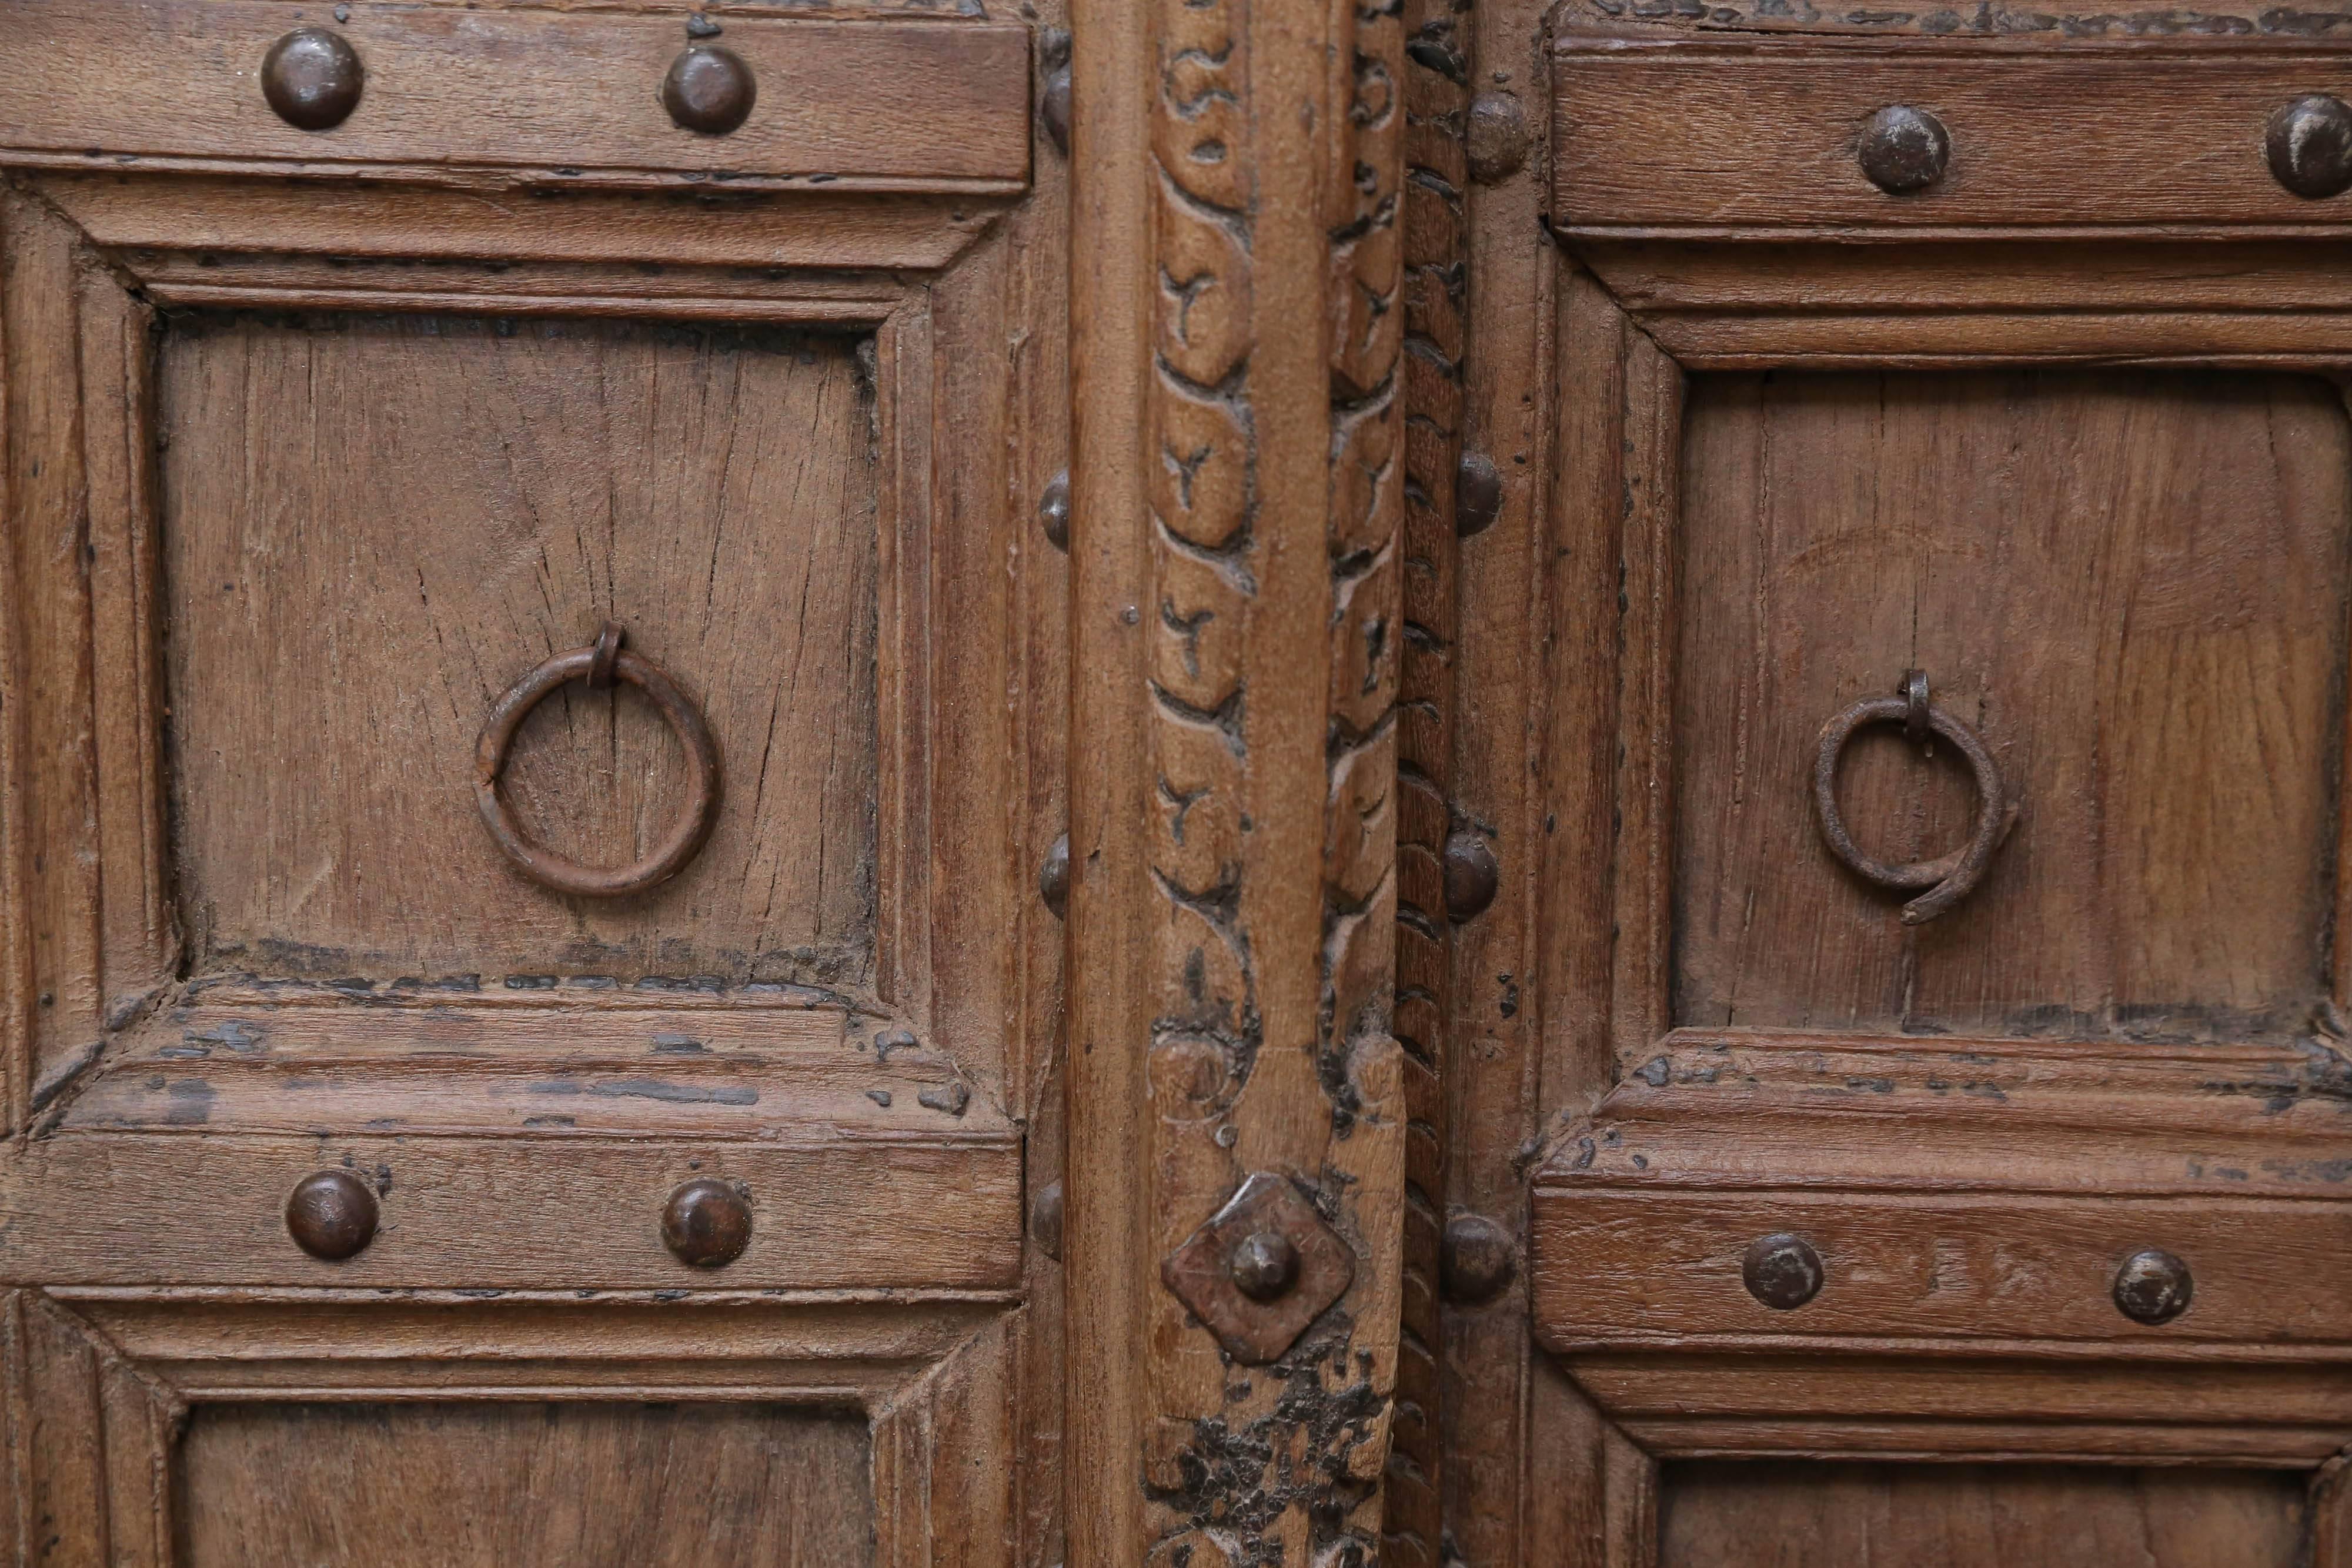 1820s Monumental Solid Teak Wood Entry Door from a Fortress For Sale 4